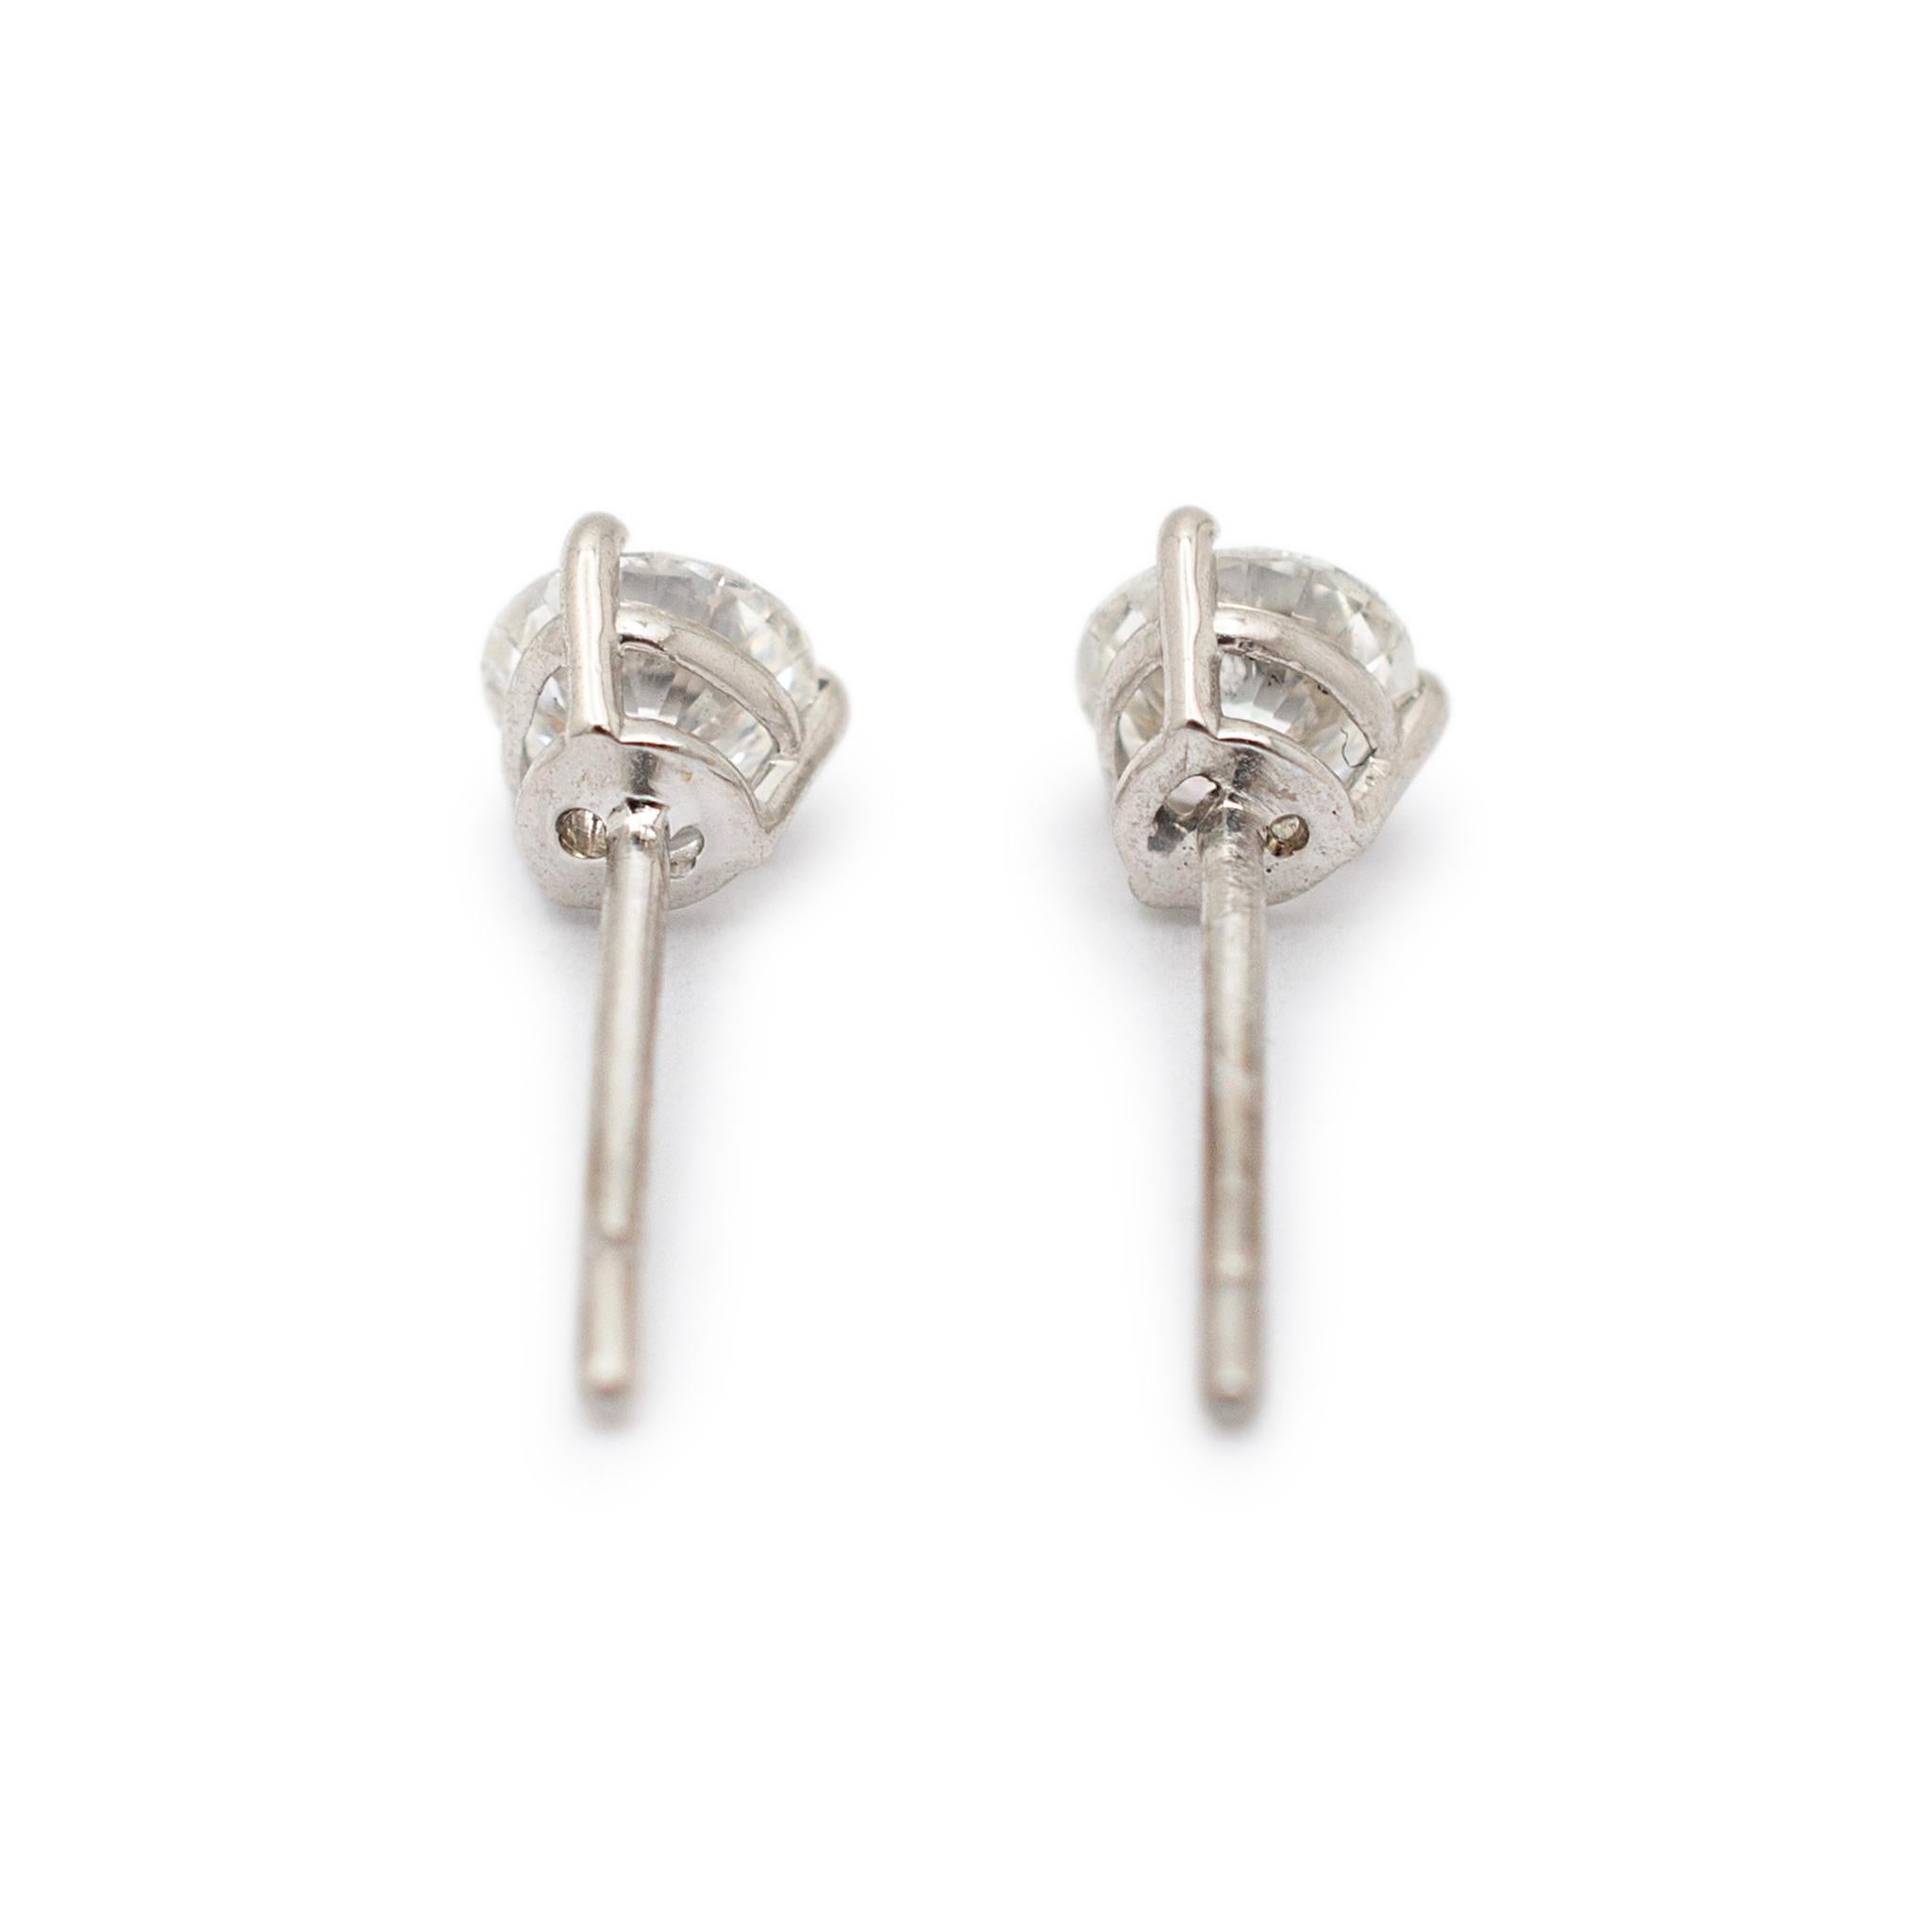 Gender: Ladies

Metal Type: 18K White Gold

Length: 0.50 Inches

Weight: 1.40 grams

18K white gold diamond stud earrings with push backs. The metal was tested and determined to be 18K white gold. Engraved with 